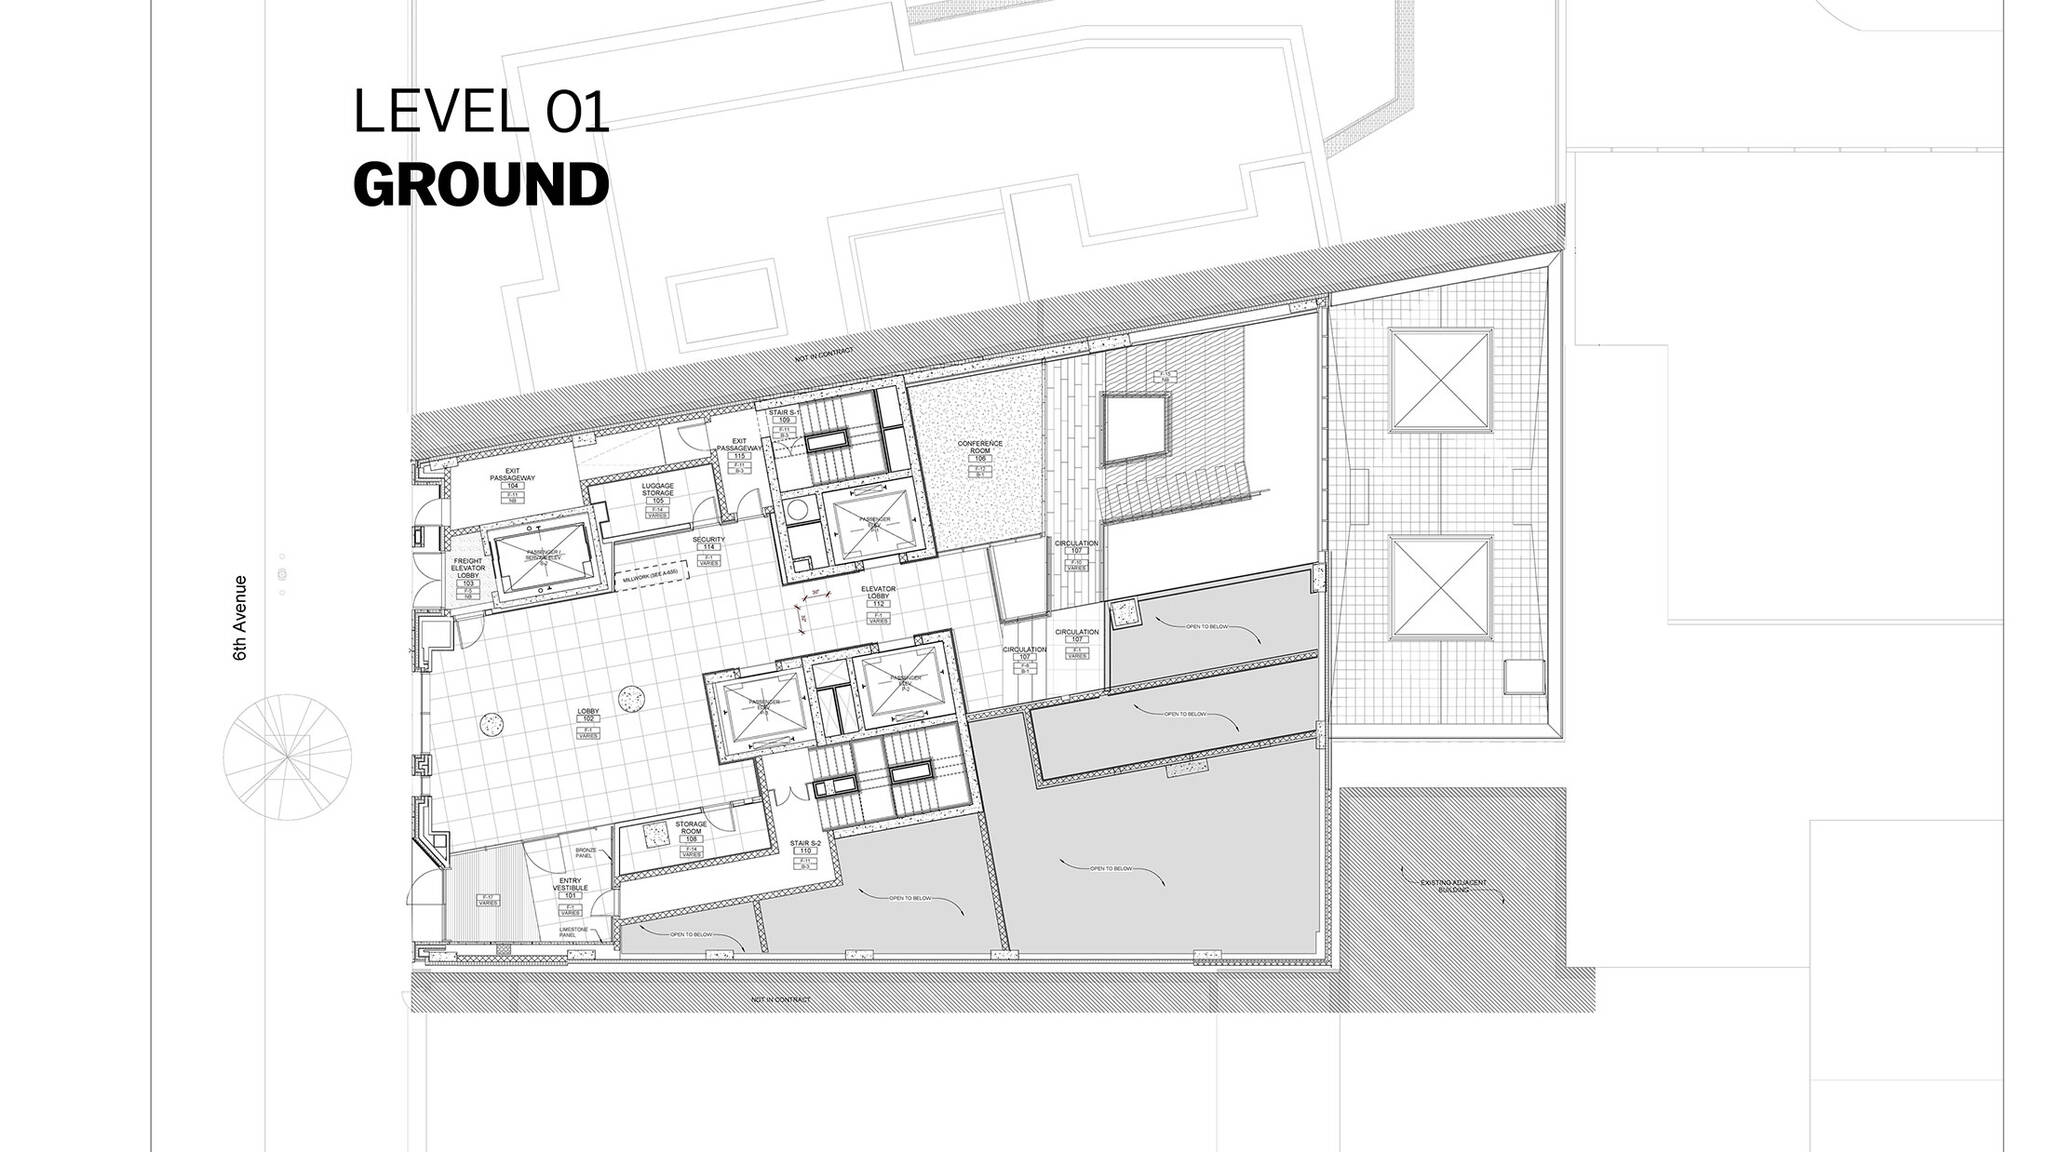 Ground floor plan of the Modular AC Hotel project located at 842 Sixth Avenue in NoMad, New York City designed by the architecture studio Danny Forster & Architecture